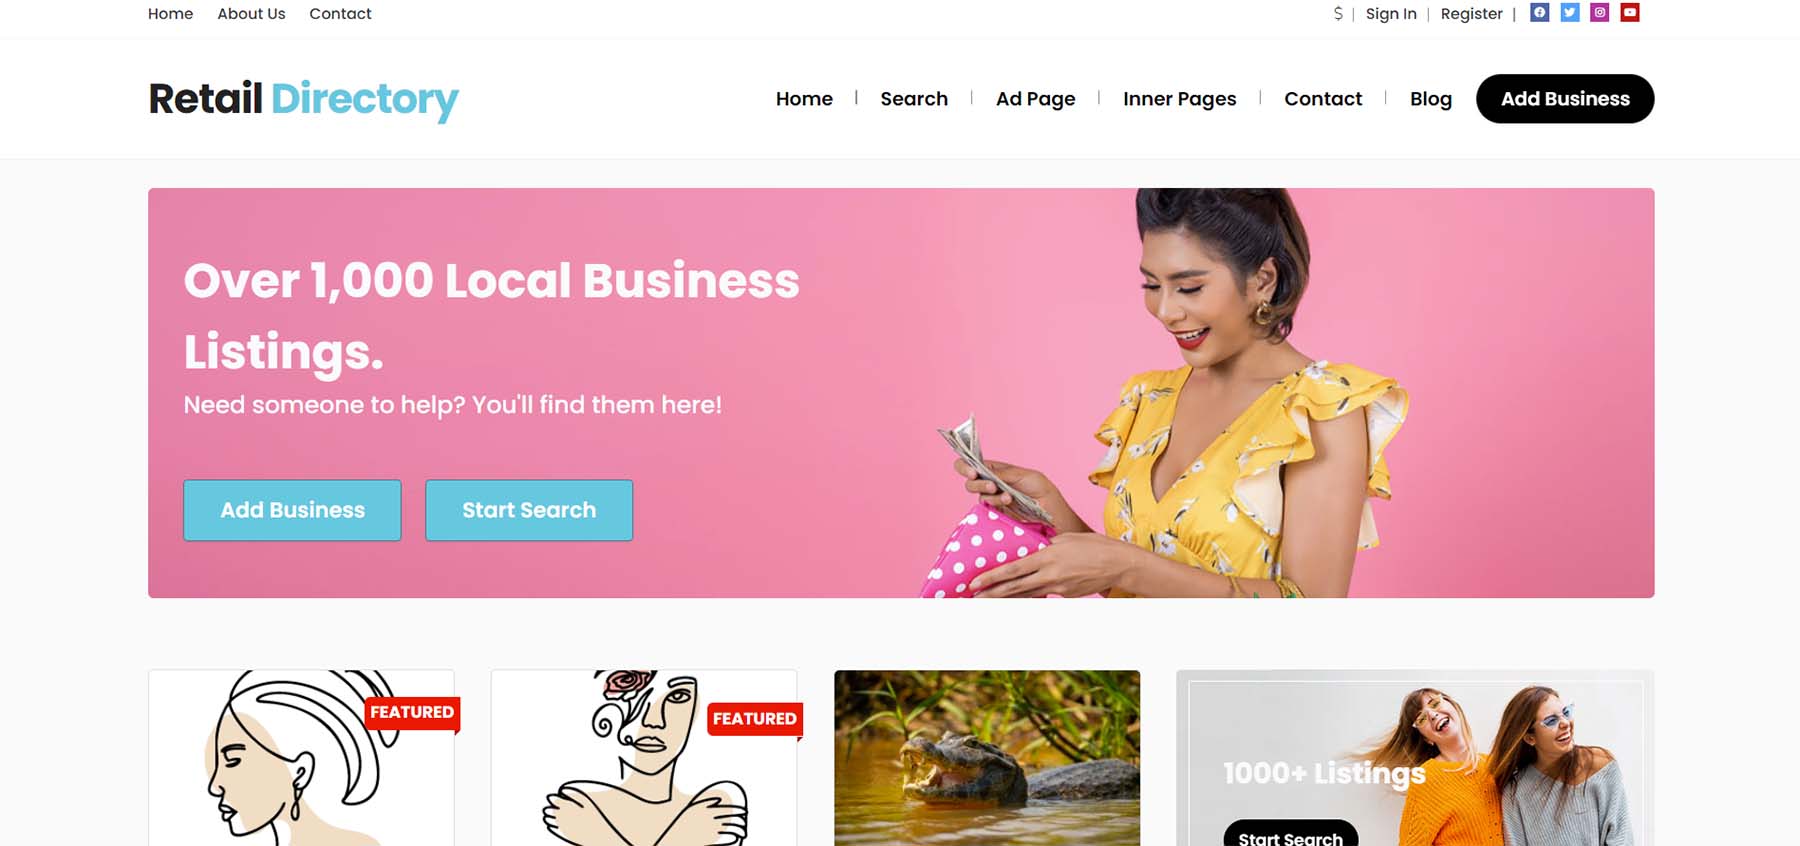 PremiumPress directory theme for businesses